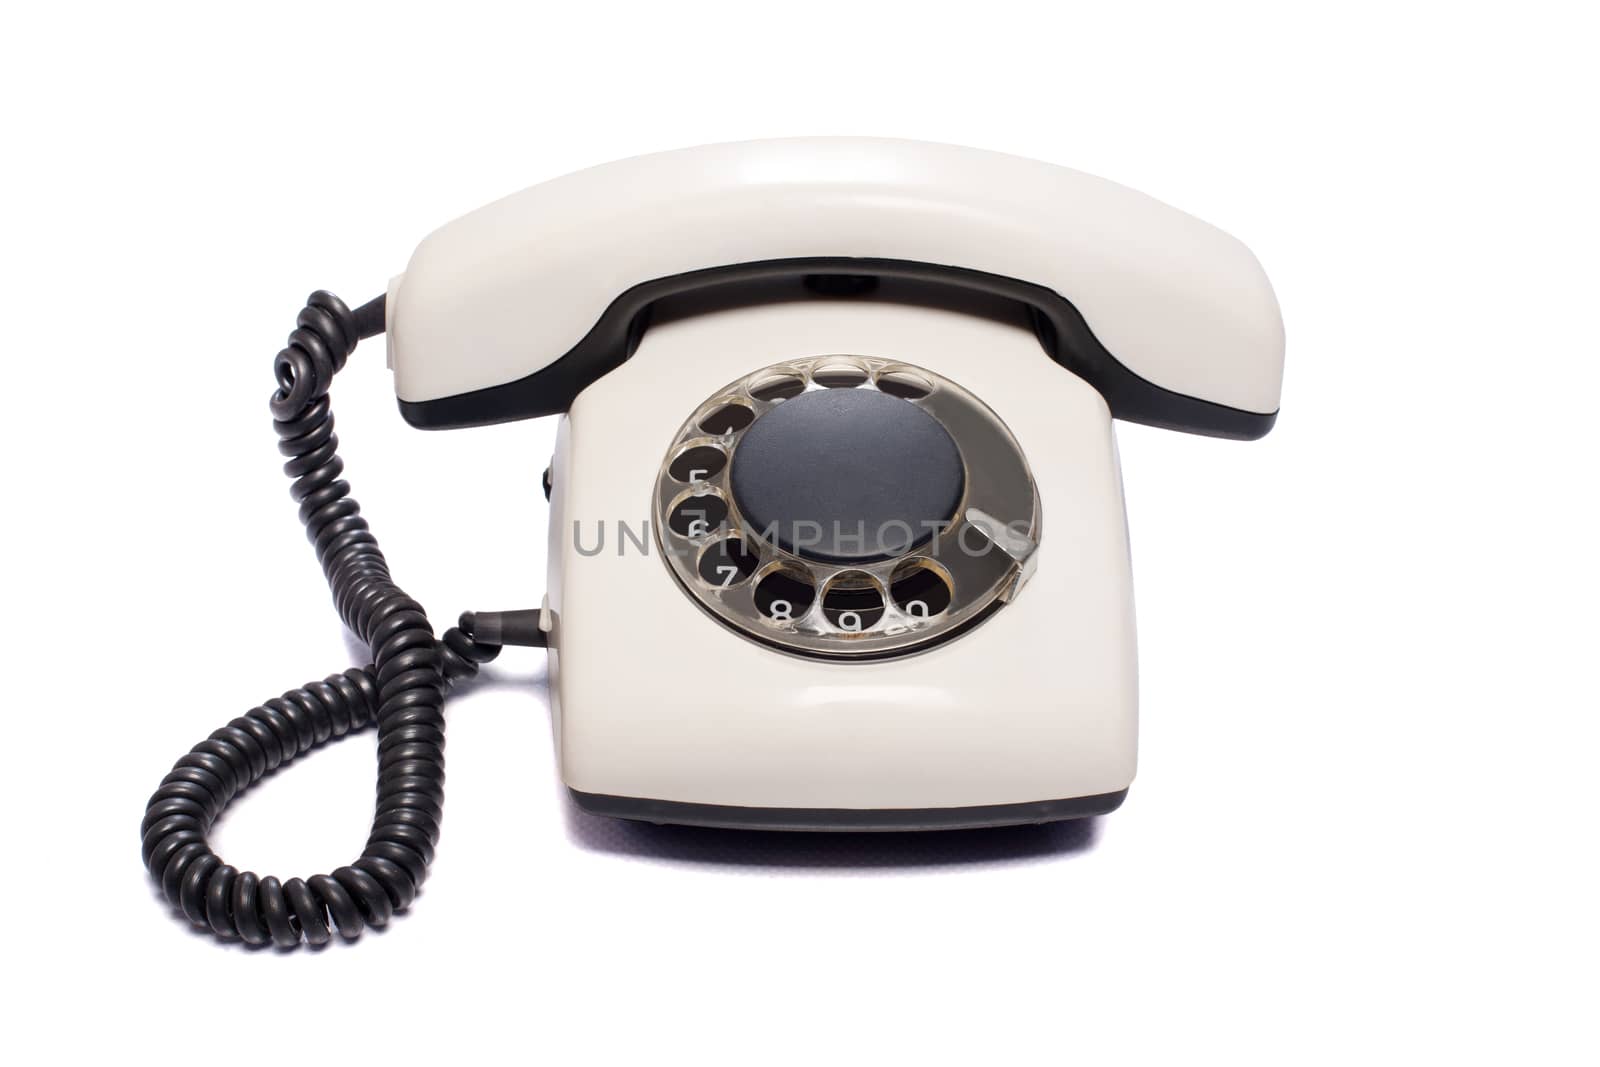 Old disk phone on white background